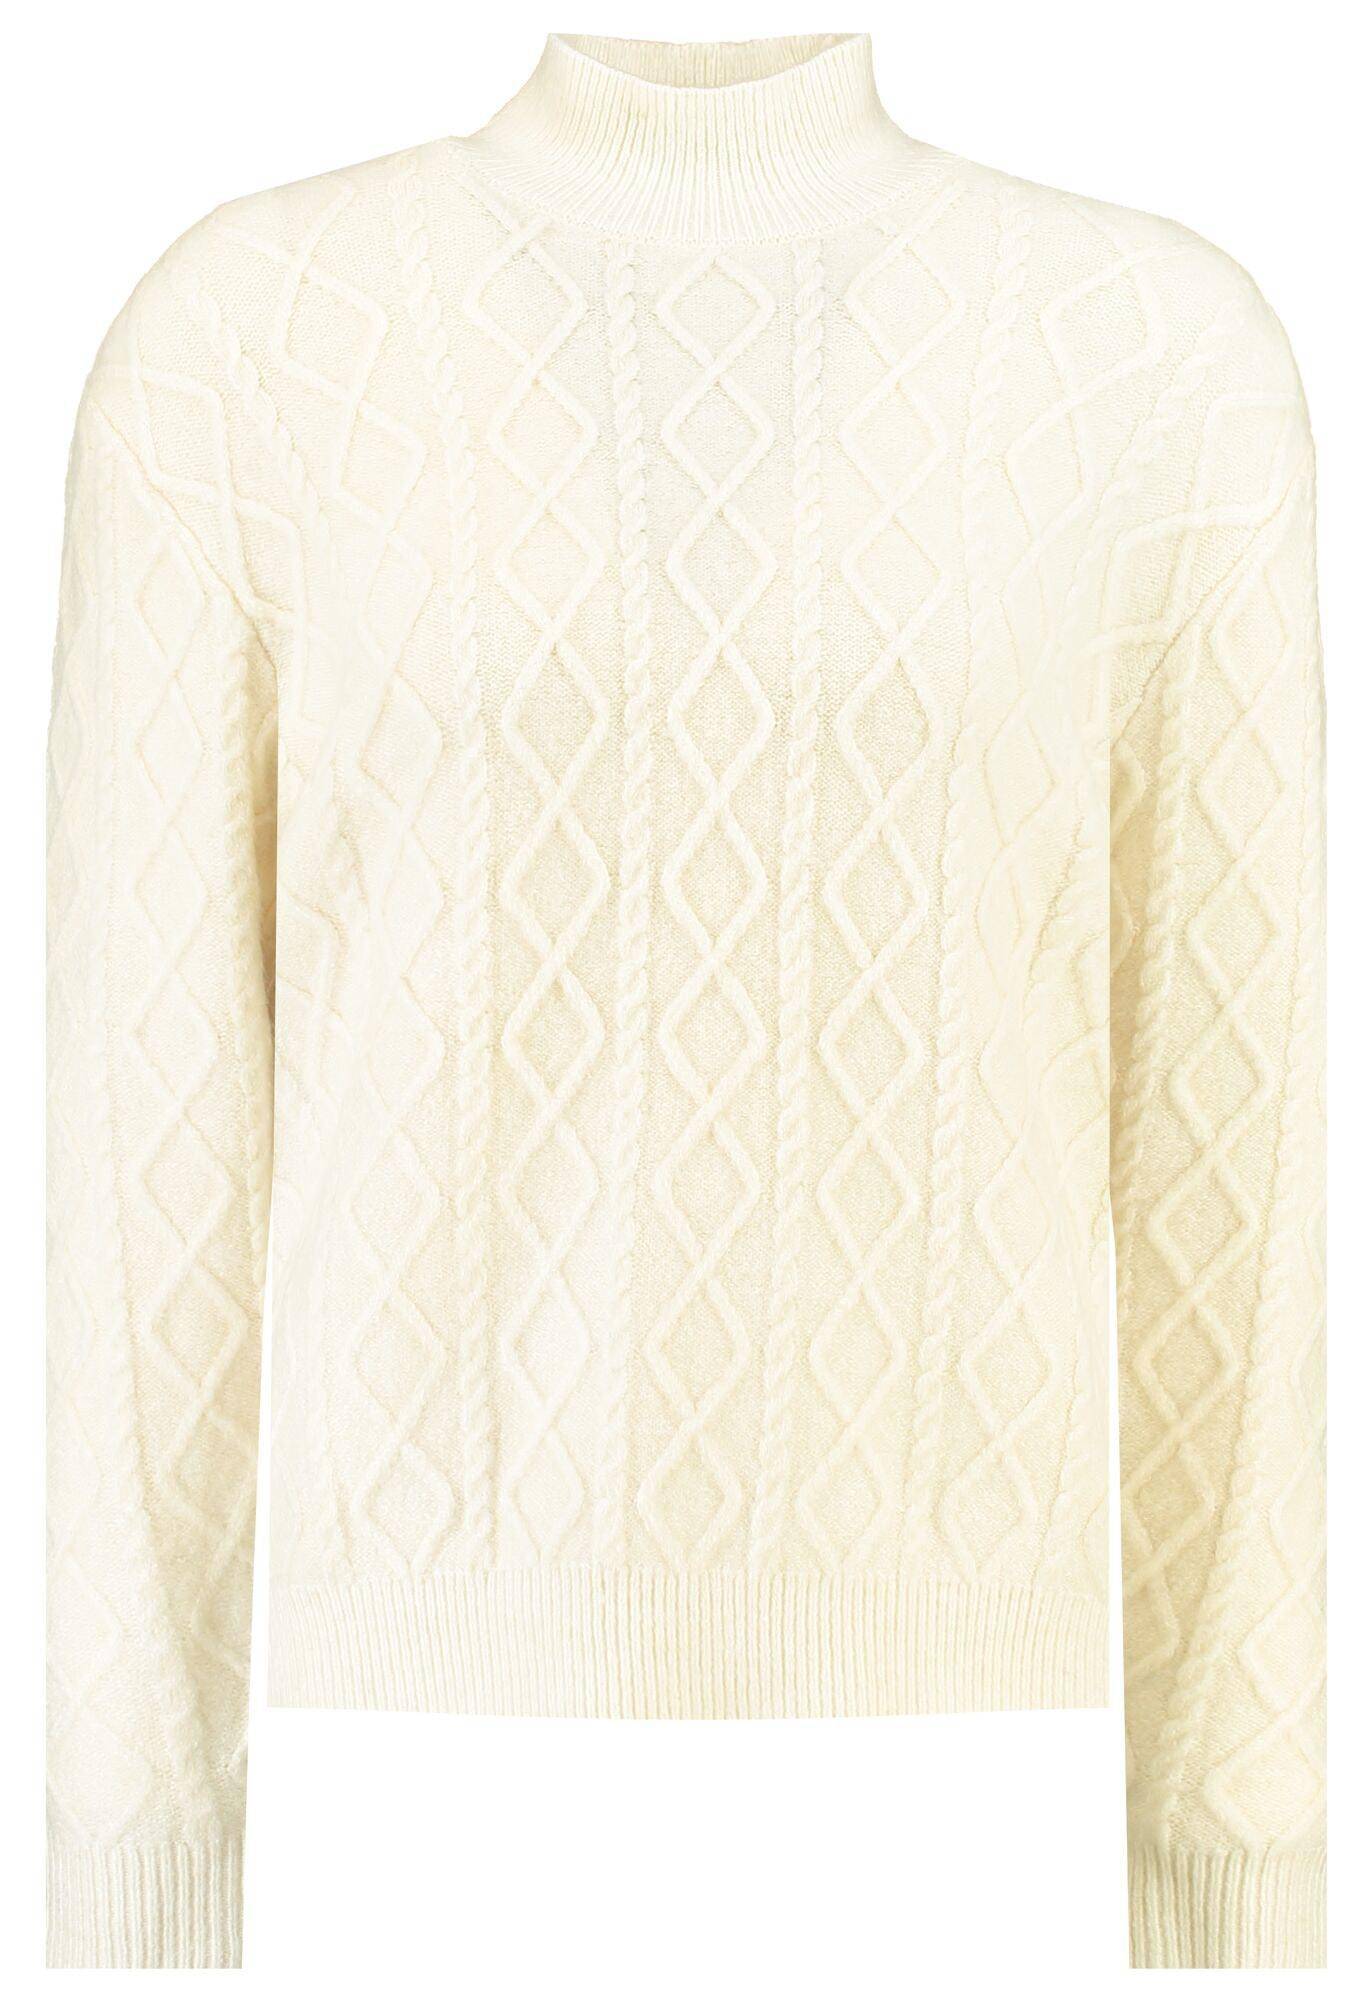 White High Collar Garcia Sweater - Your Style Your Story